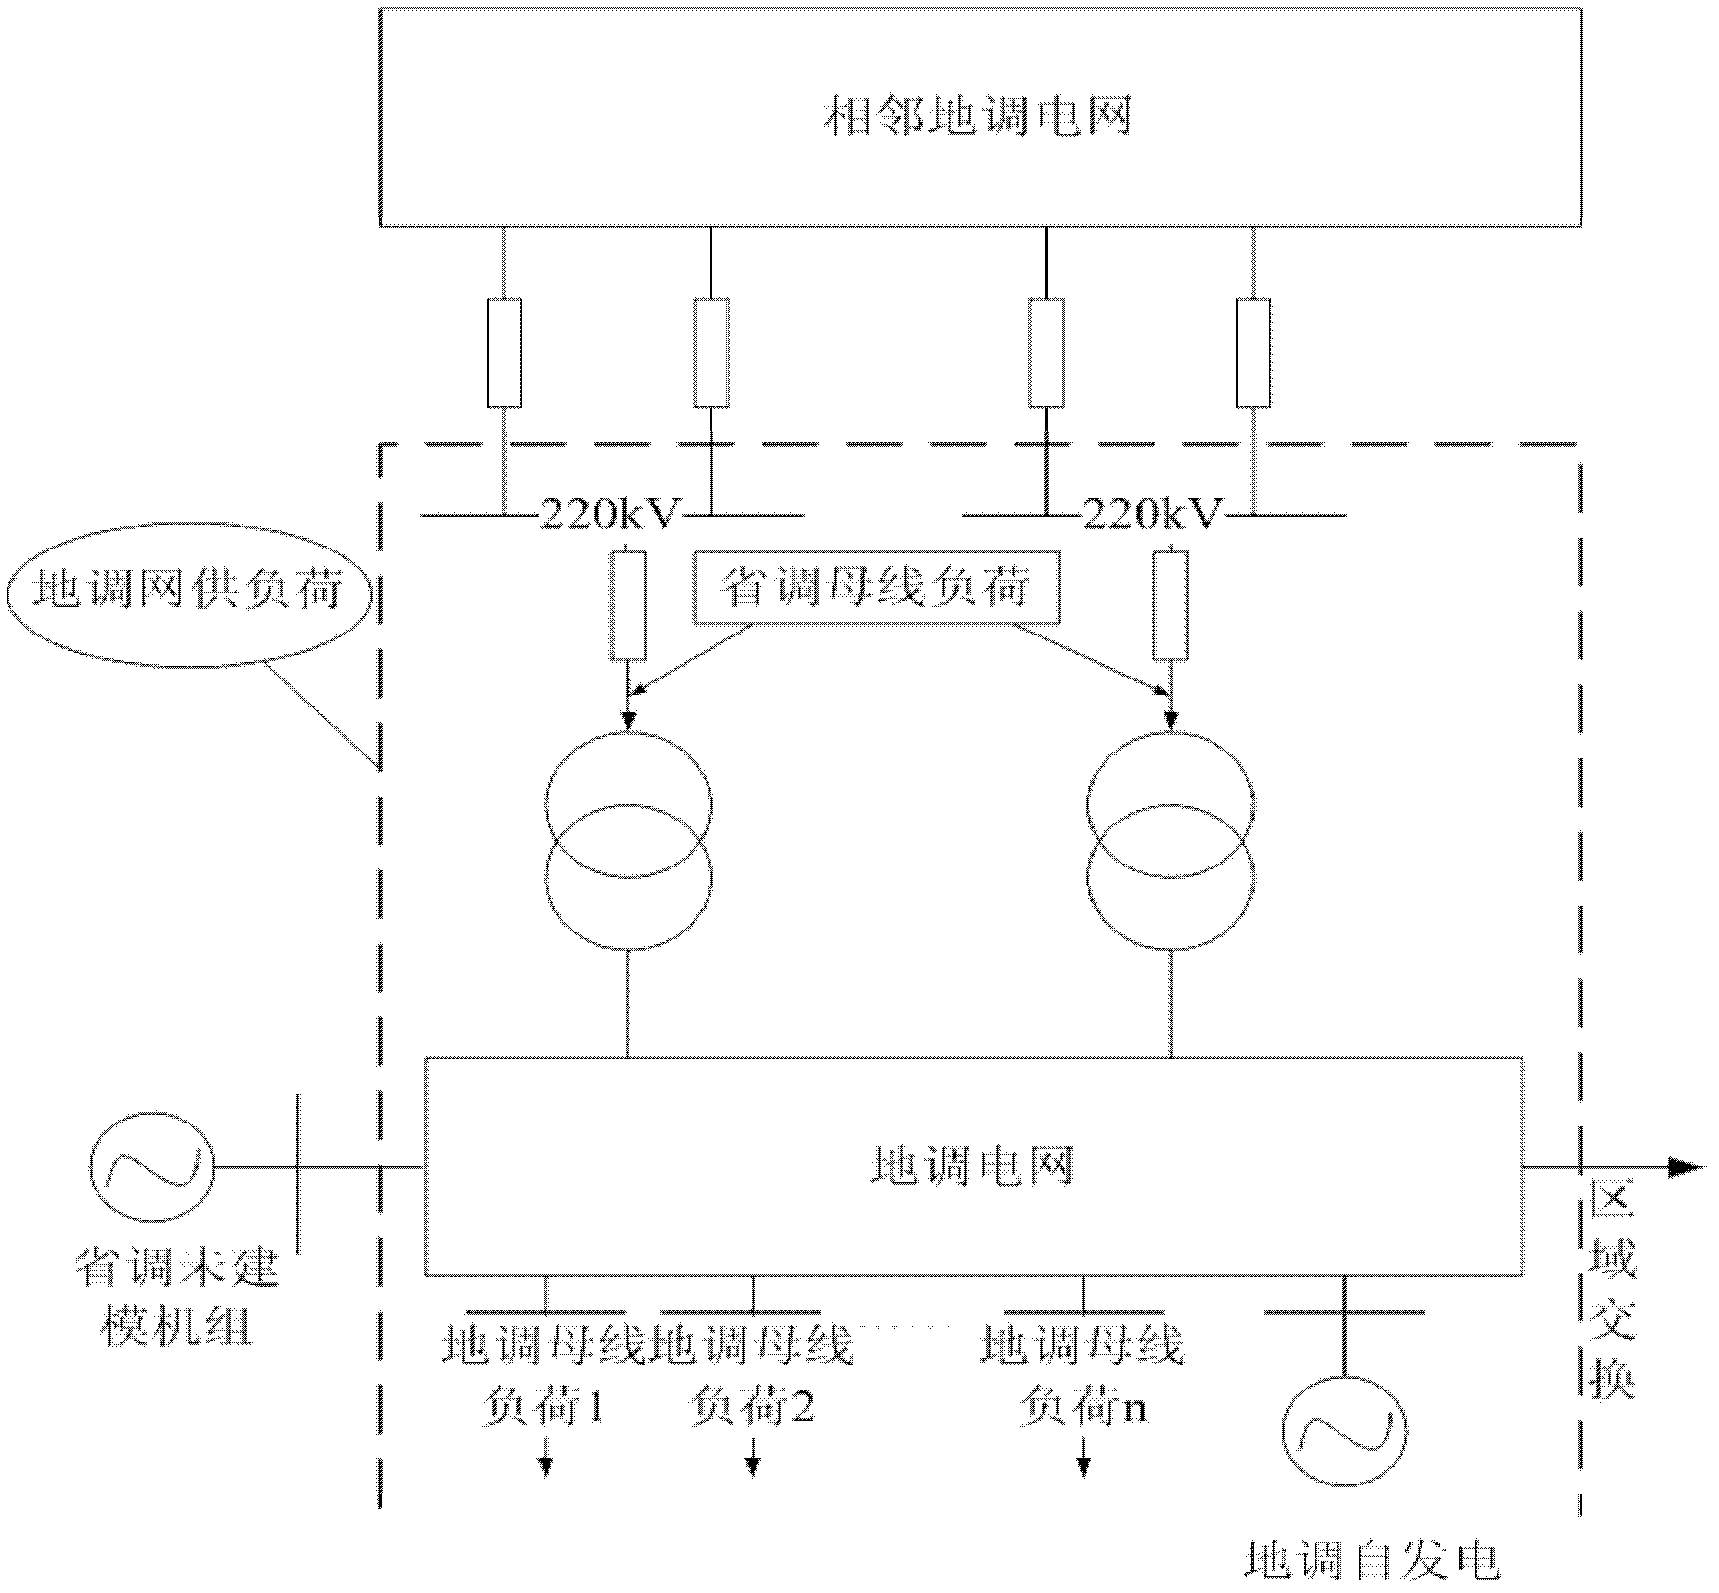 Method for processing unmodeled unit in process of forecasting bus load